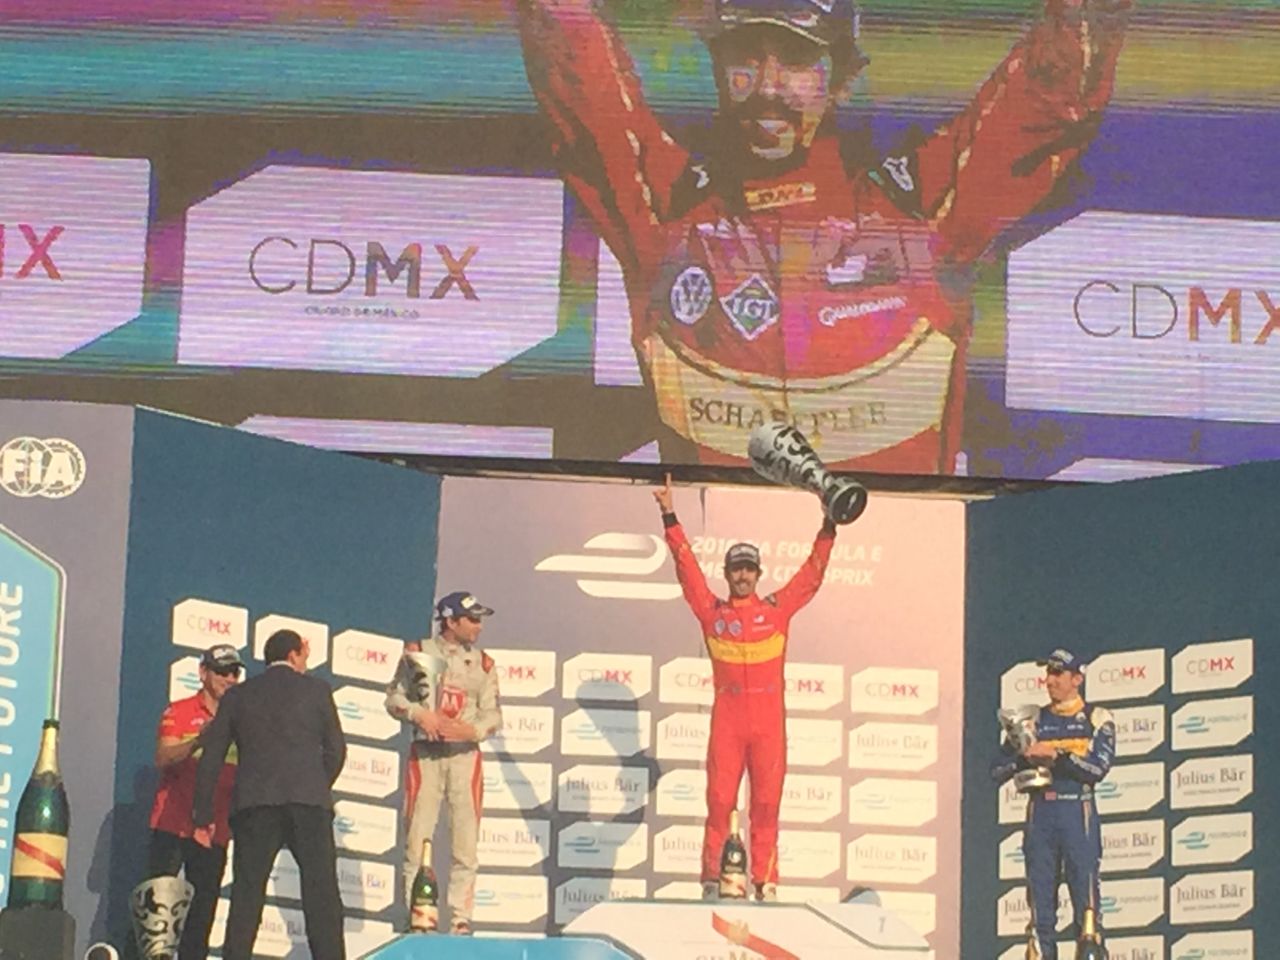 The arrival of Mexico's first Formula E race wasn't only for entertainment purposes. It was important for organizers to promote cleaner transport -- the cars are all powered by batteries and an electric motor. Lucas di Grassi (center) won the race but was disqualified later because his car was under the minimum weight.